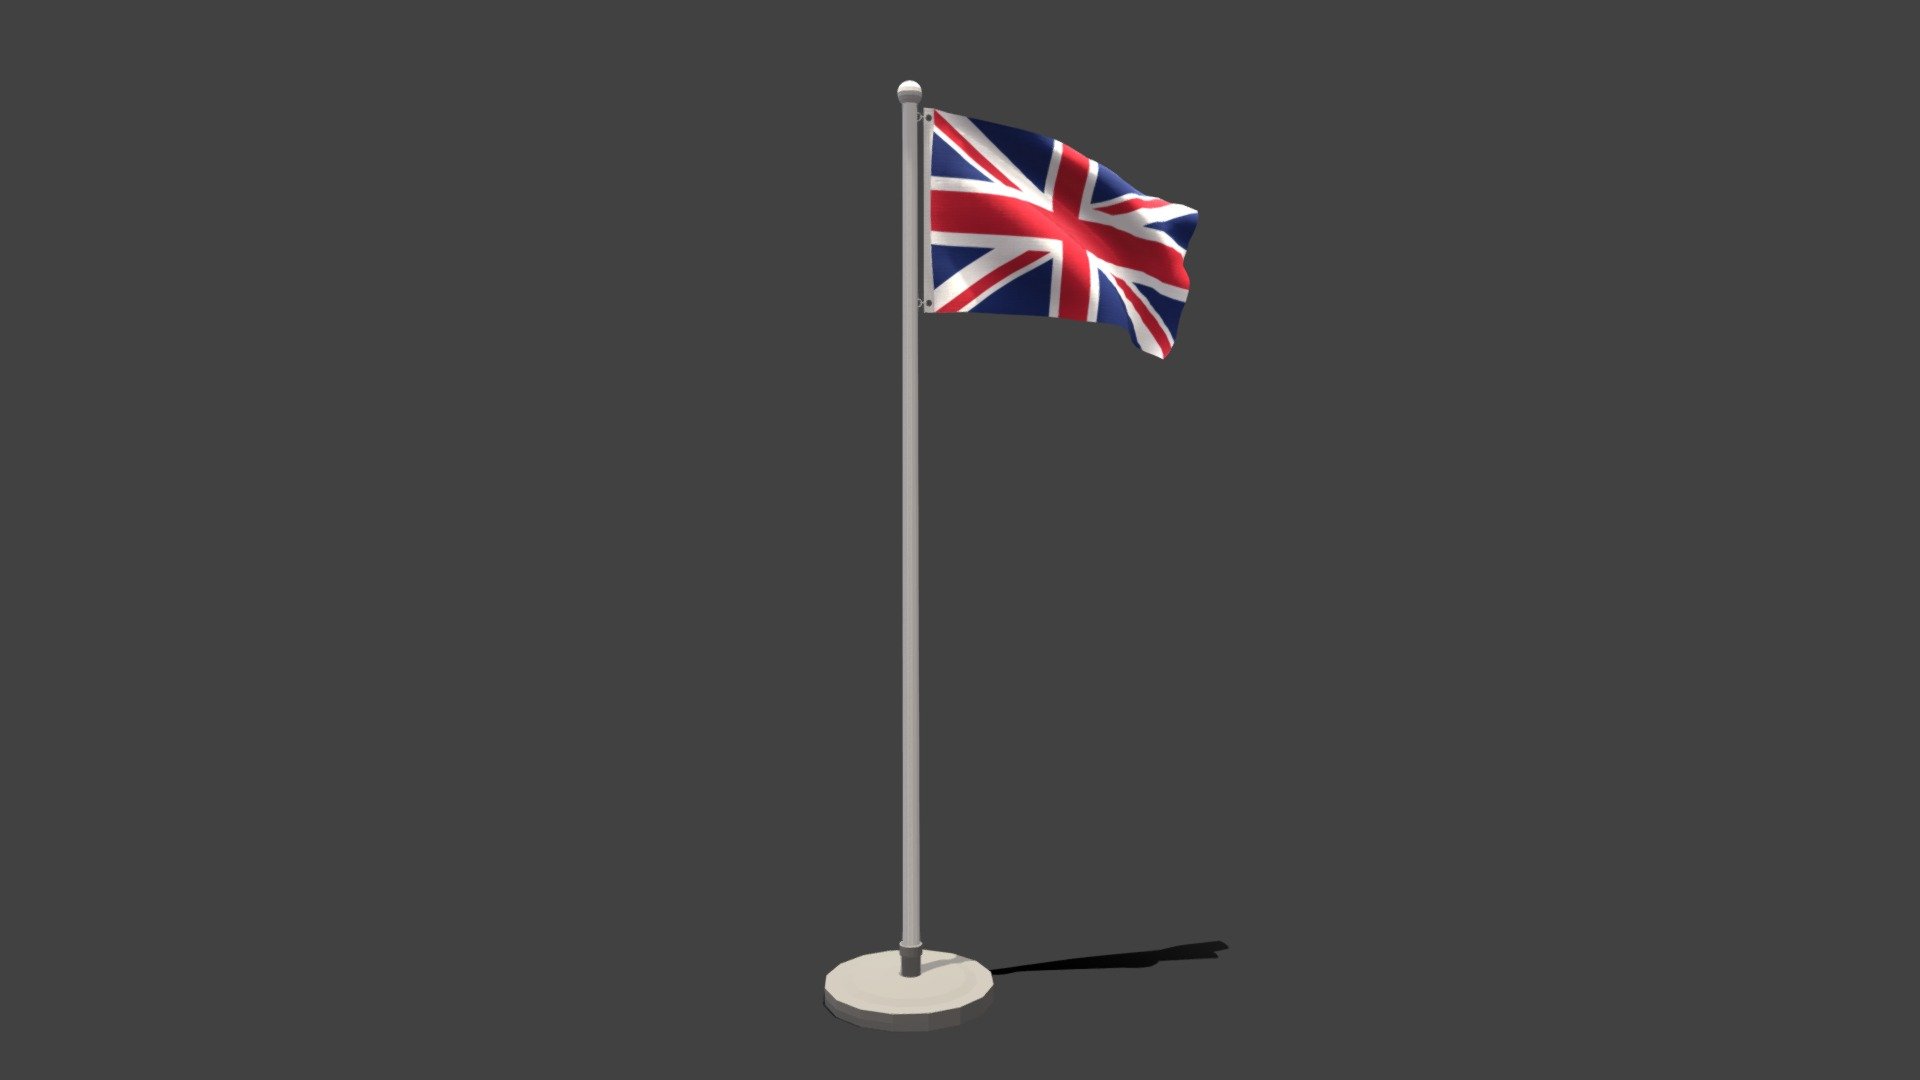 This is a low poly 3D model of an animated United Kingdom Flag. The low poly flag was modeled and prepared for low-poly style renderings, background, general CG visualization presented as 2 meshes with quads only.

Verts : 1.536 Faces : 1.459.

1024x1024 textures included. Diffuse, roughness and normal maps available only for flag. The pole have simple materials with colors.

The animation is based on shapekeys, 248 frames and seamless, no rig included.

The original file was created in blender. You will receive a OBJ, FBX, blend, DAE, Stl, gLTF, abc.
PLEASE NOTE Animation icluded only in blend, abc and glTF files

Warning: Depending on which software package you are using, the exchange formats (.obj , .dae, .fbx) may not match the preview images exactly. Due to the nature of these formats, there may be some textures that have to be loaded by hand and possibly triangulated geometry 3d model